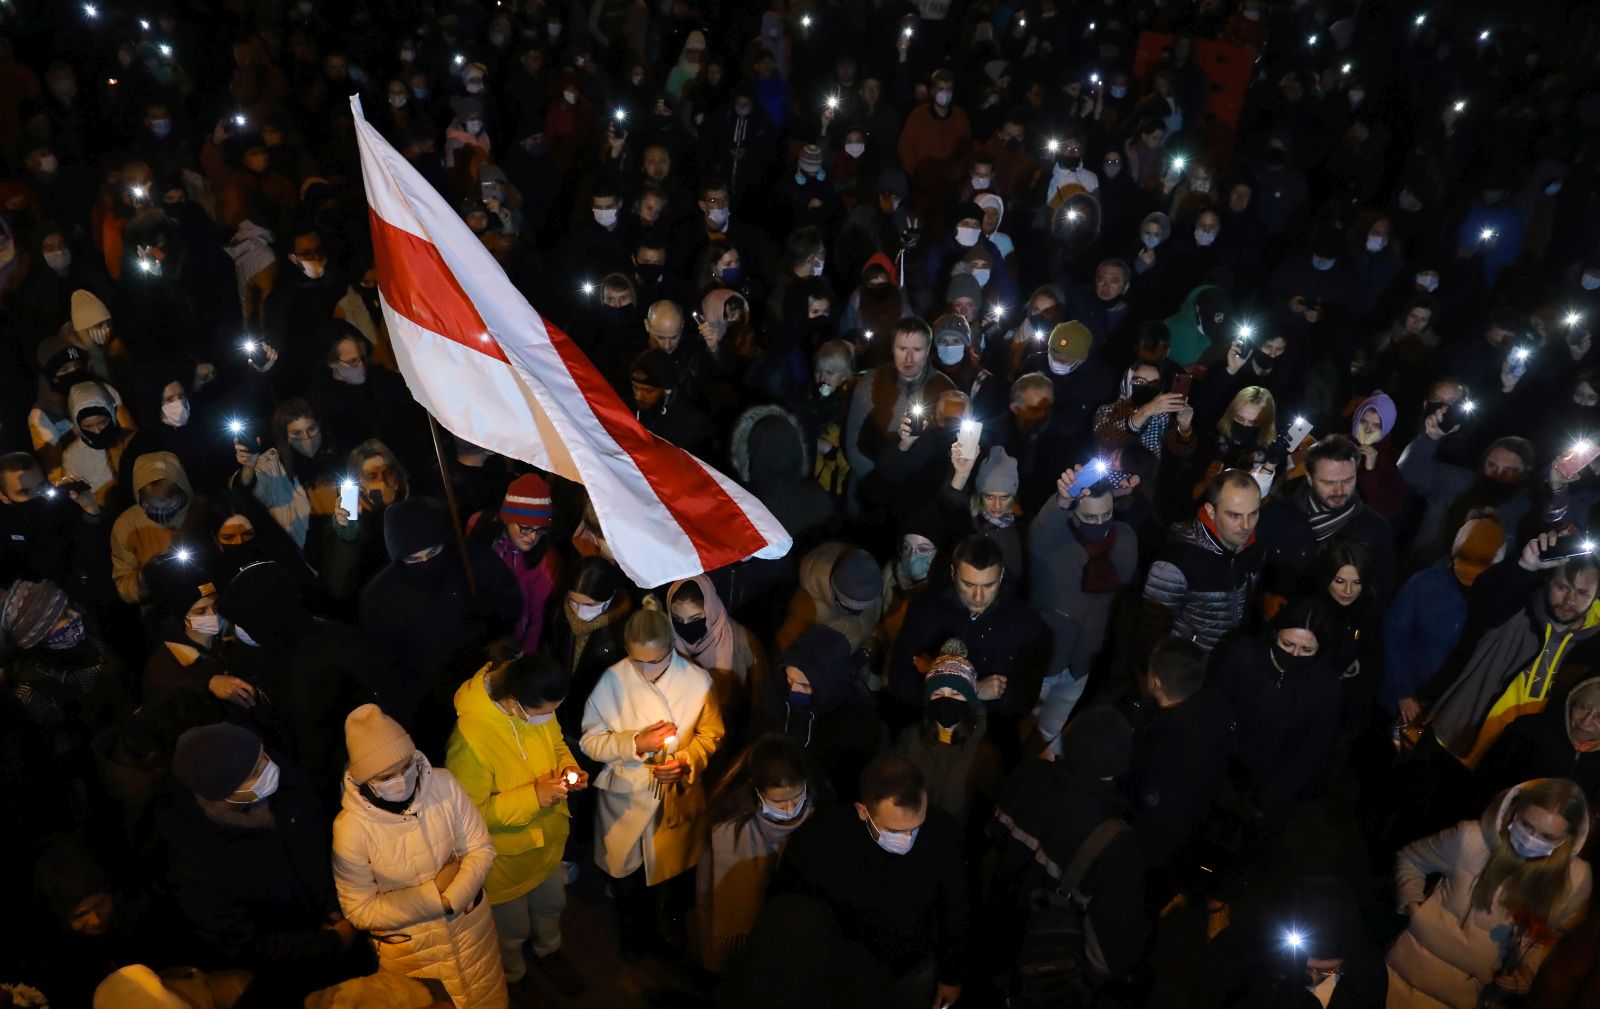 epa08816768 Belarusians light phones, as they bring candles at Change Square to commemorate Roman Bondarenko in Minsk, Belarus, late 12 November 2020. A 31-year-old Roman Bondarenko was reportedly injured by masked men on late 11 November in such a way that he died in hospital later.  EPA/STR